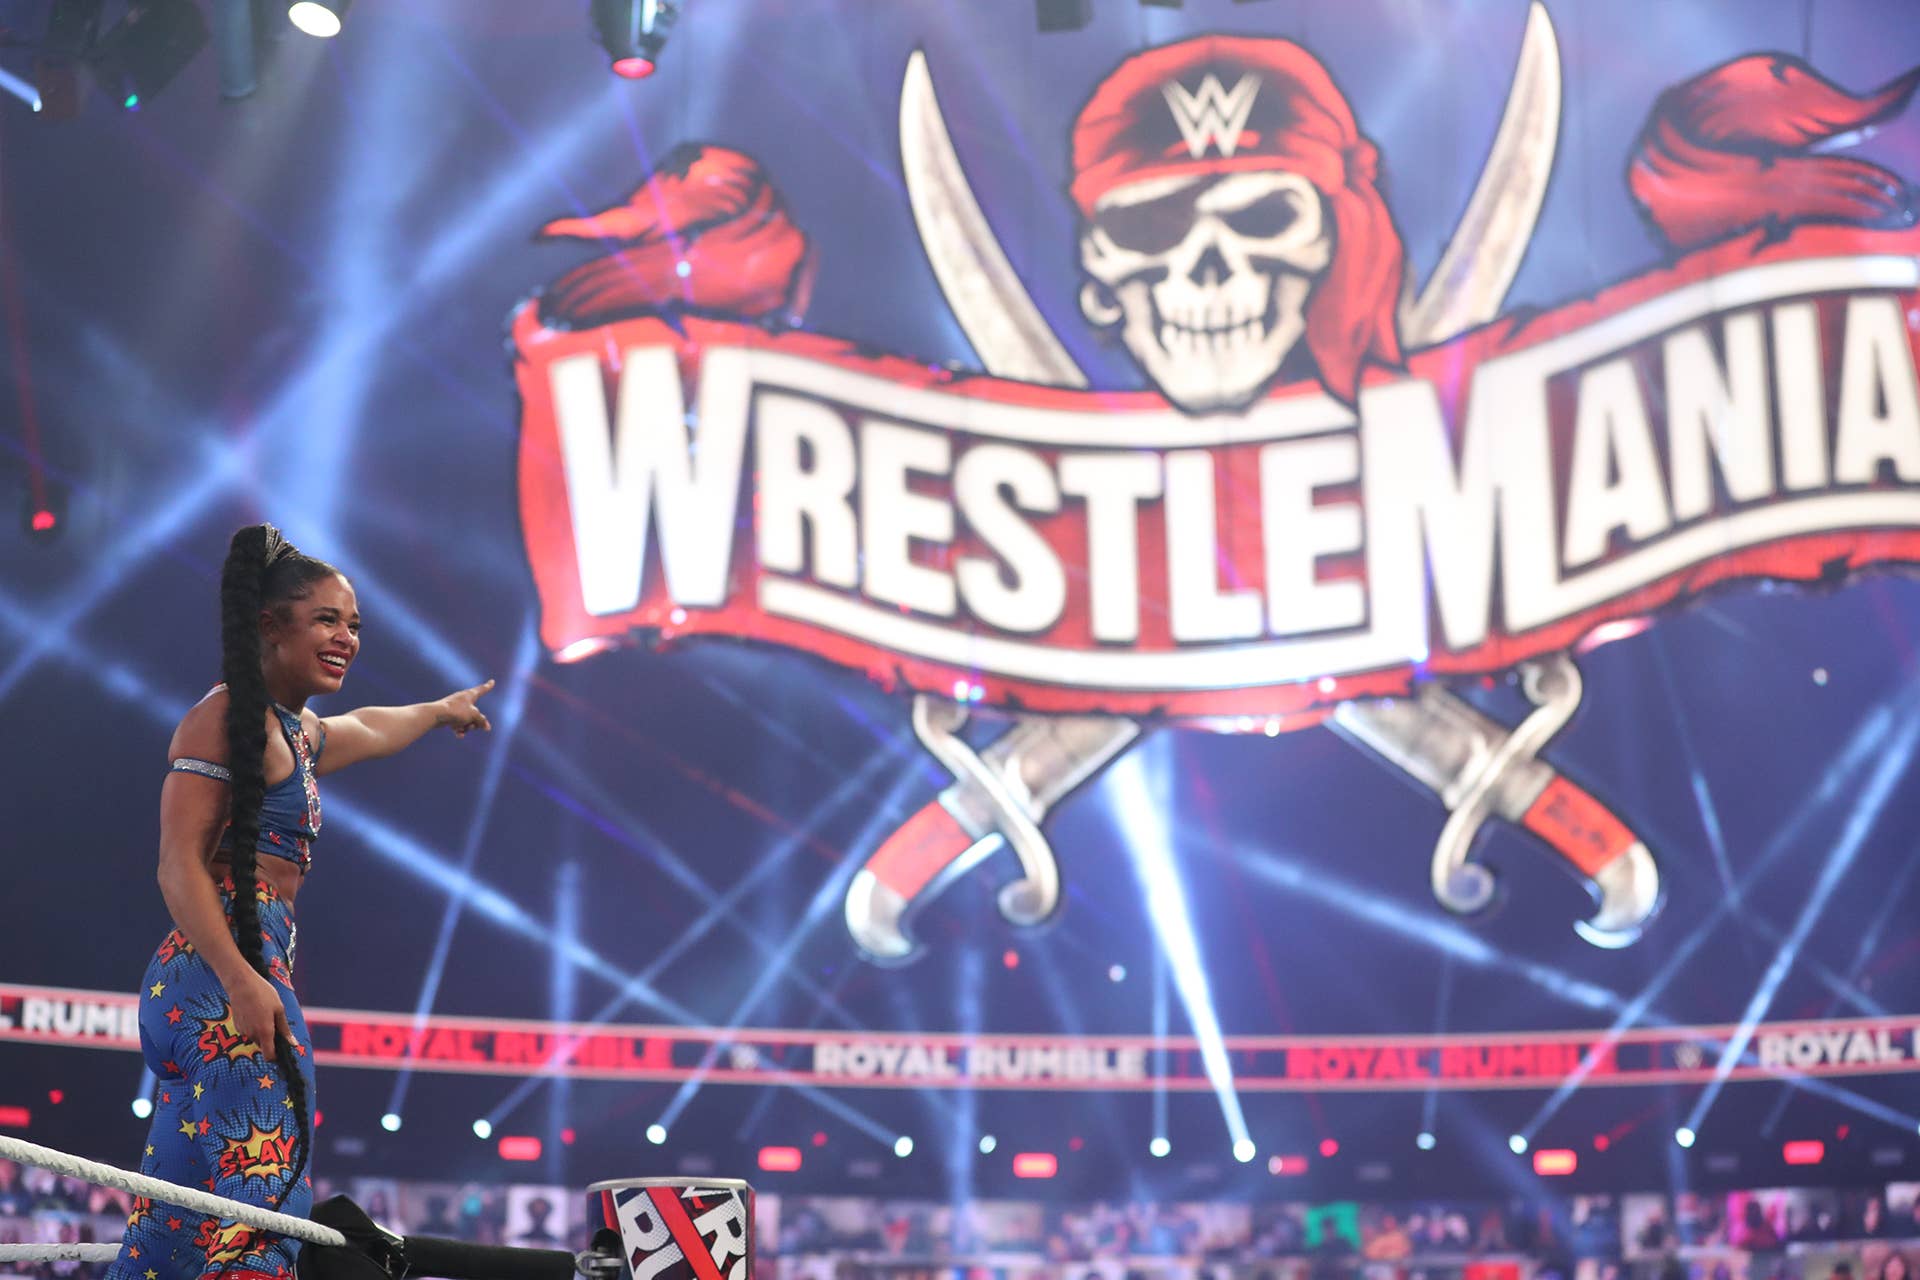 How WWE Pulled Off WrestleMania 36 Without Fans, Business Impact